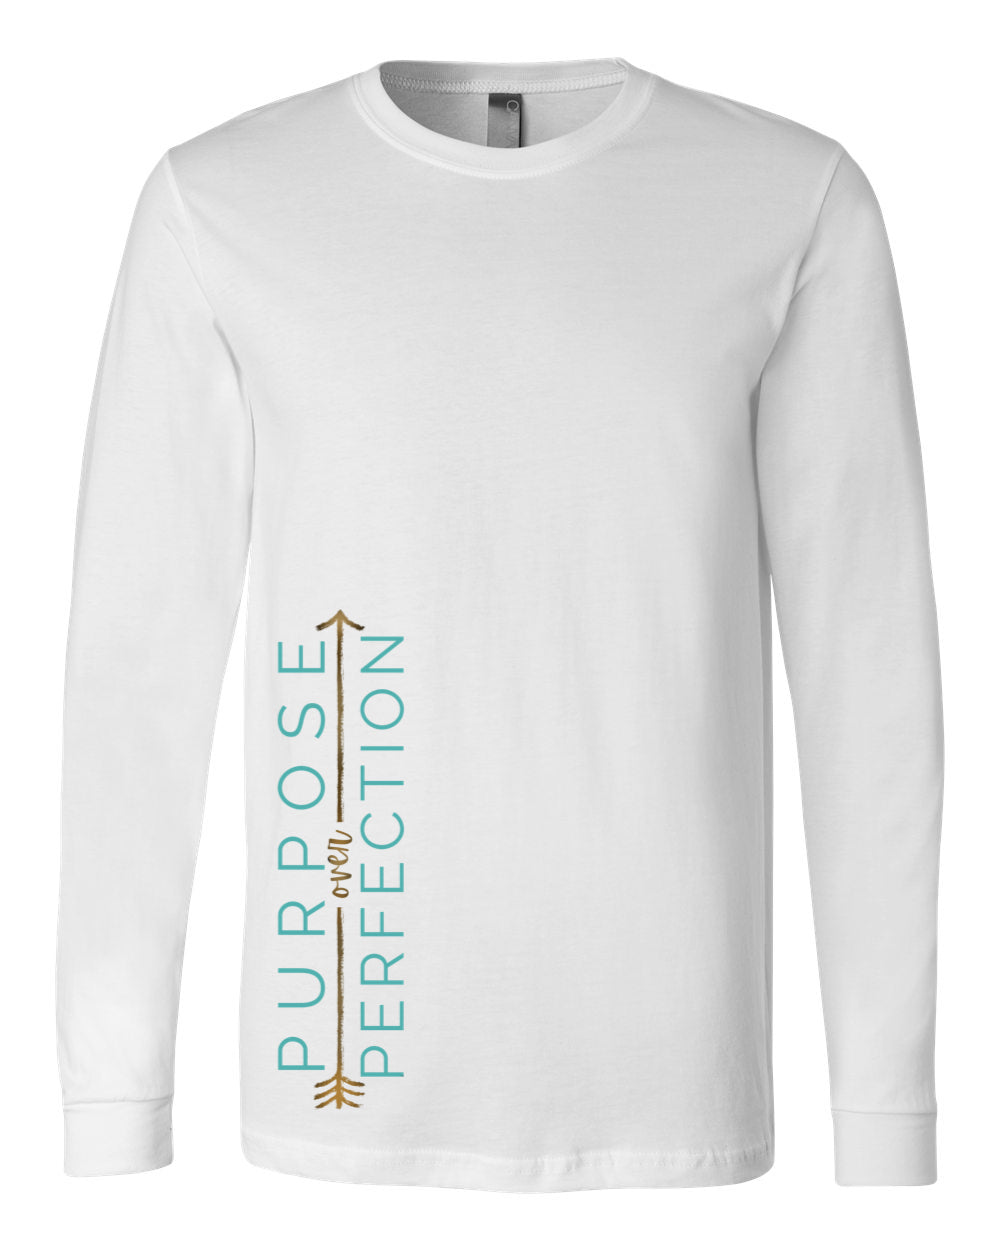 Purpose Over Perfection Long Sleeve Tee